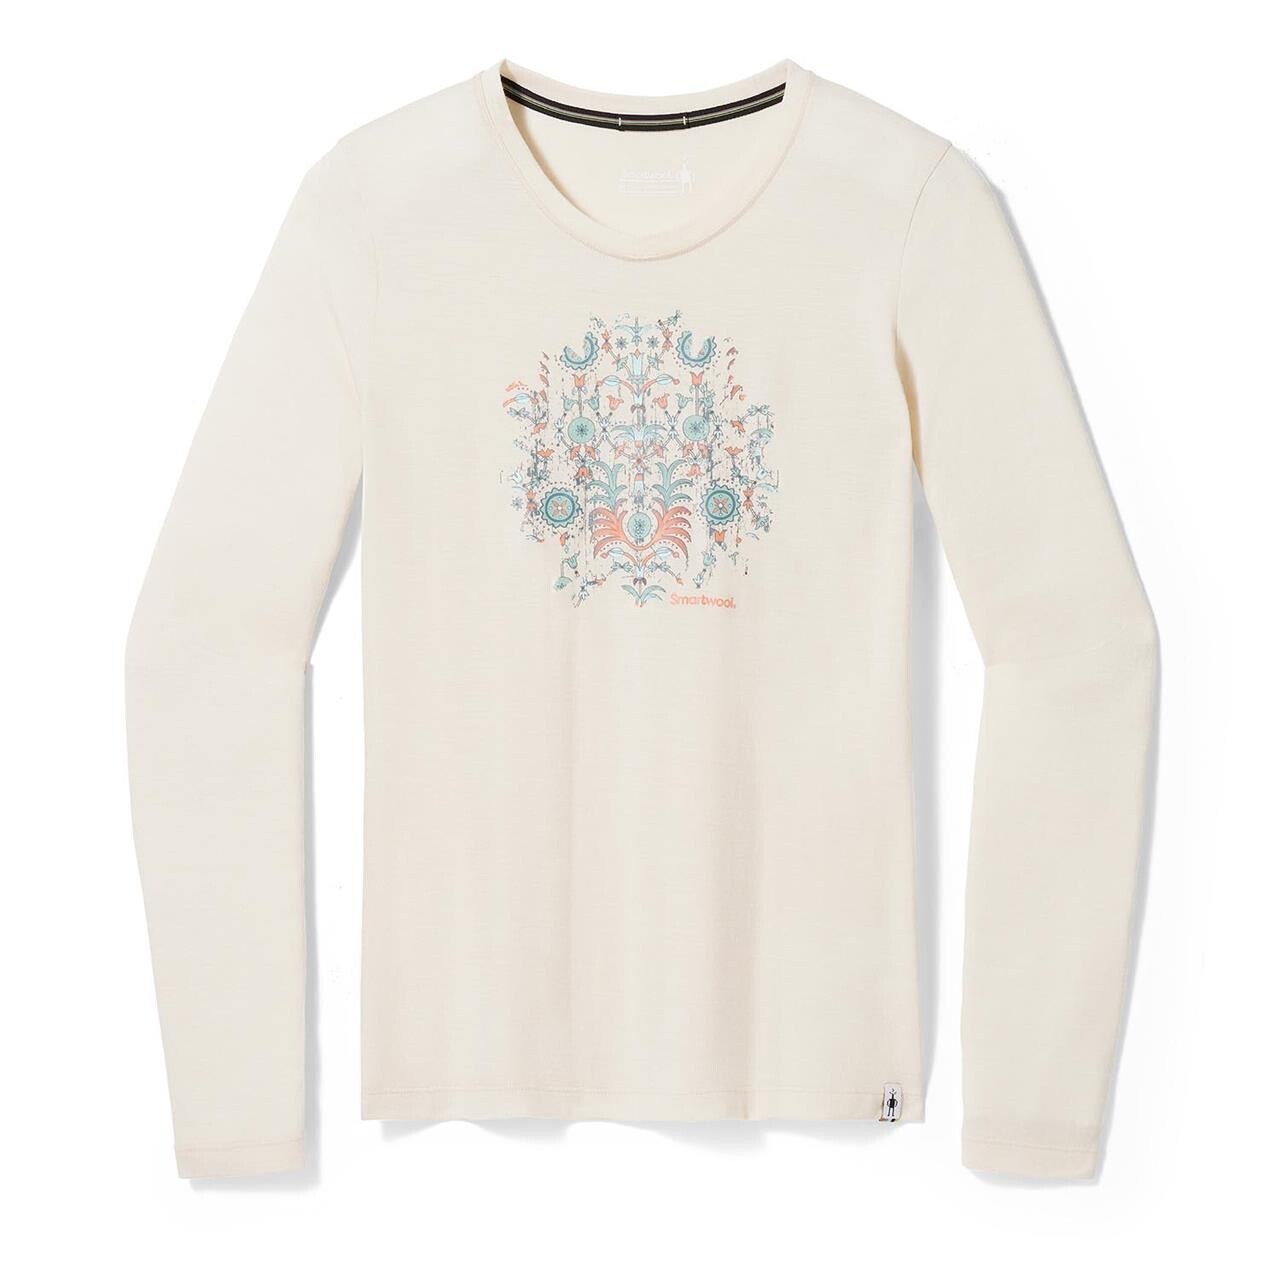 Se Smartwool Womens Floral Tundra Graphic L/S Tee (Beige (ALMOND HEATHER) X-large) hos Friluftsland.dk